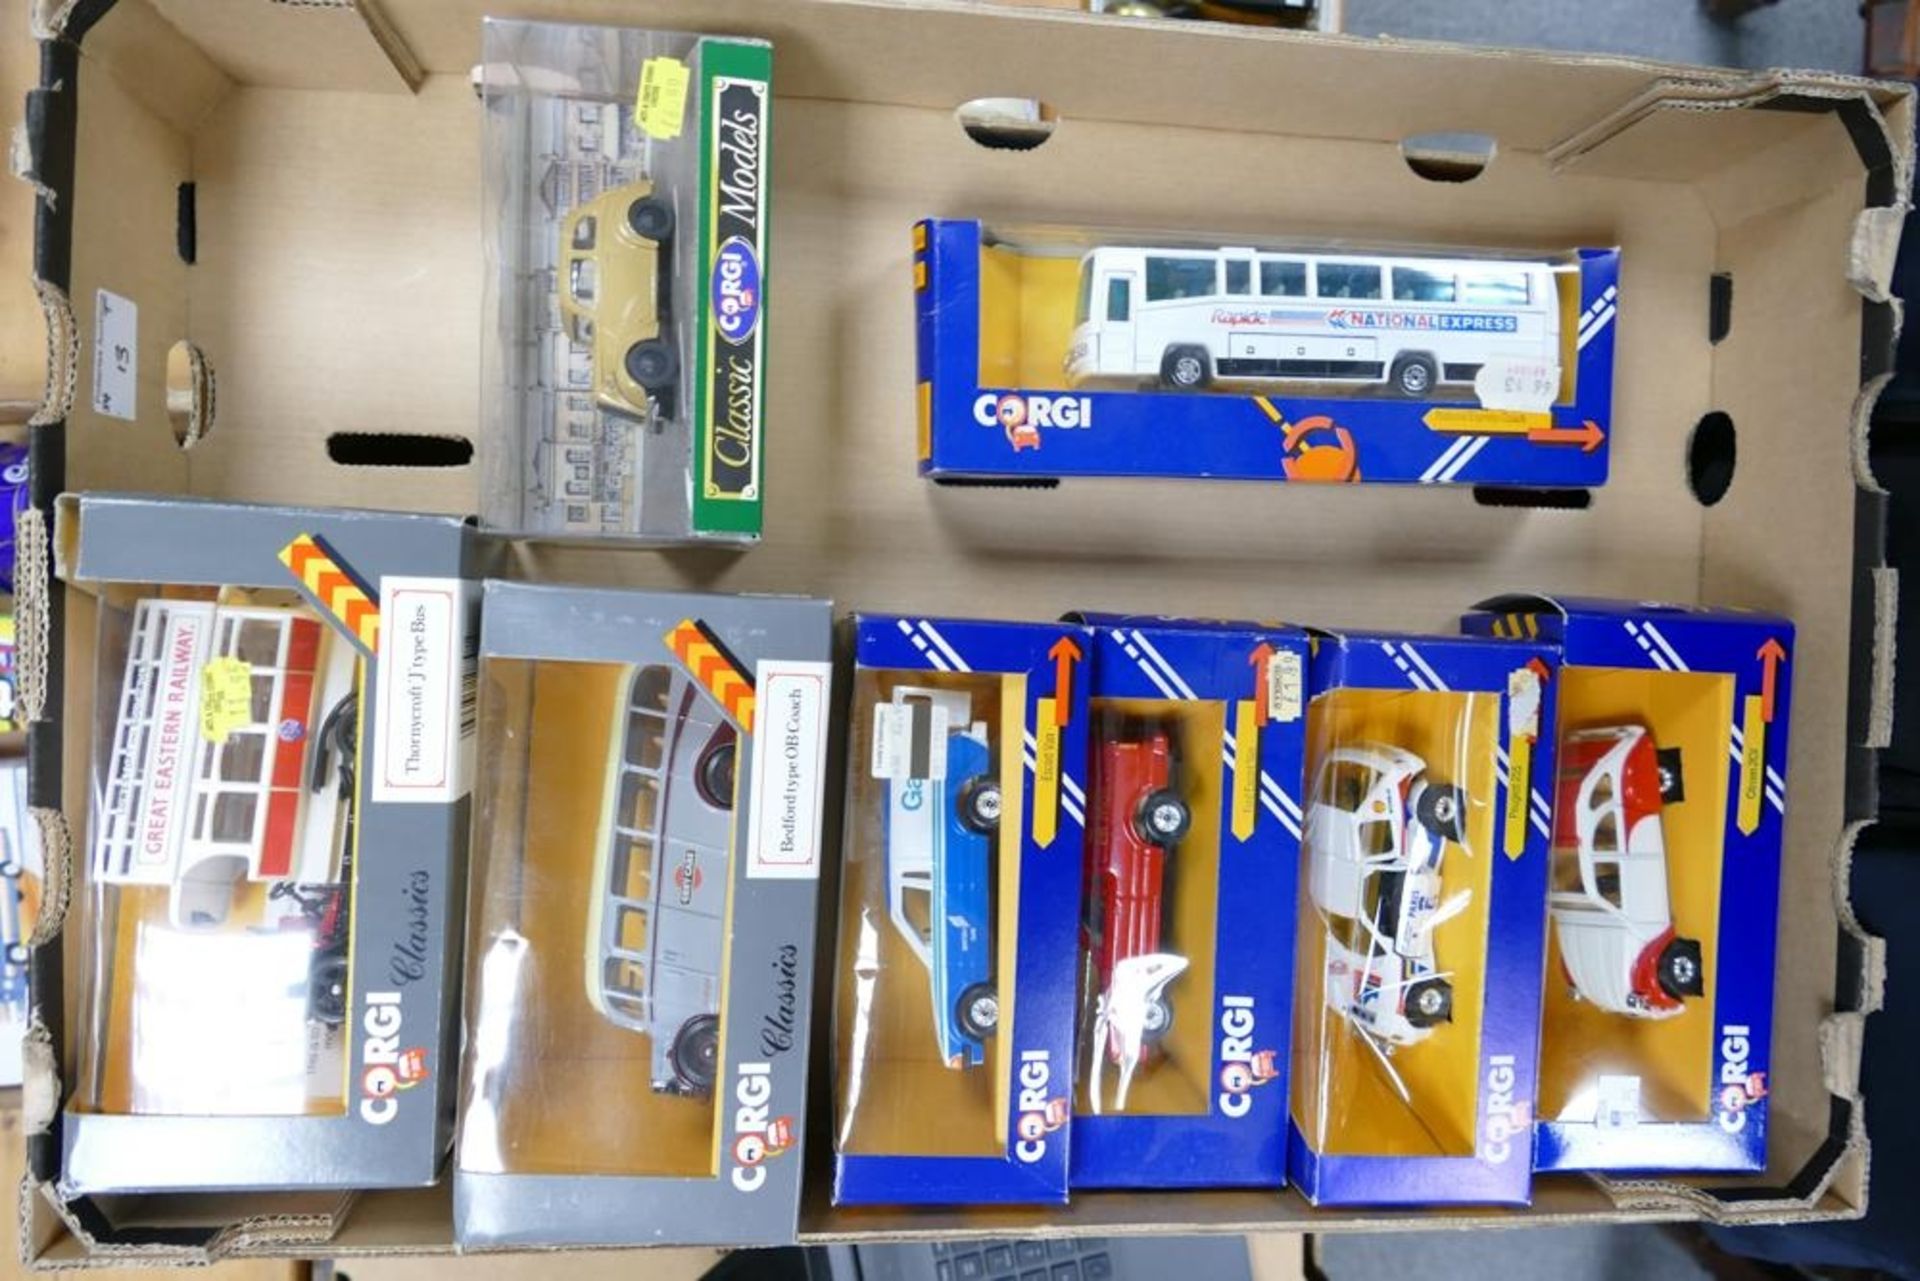 A collection of Boxed Corgi Die Cast Model Toy Cars including National Express Coach, Citroen 2cv,